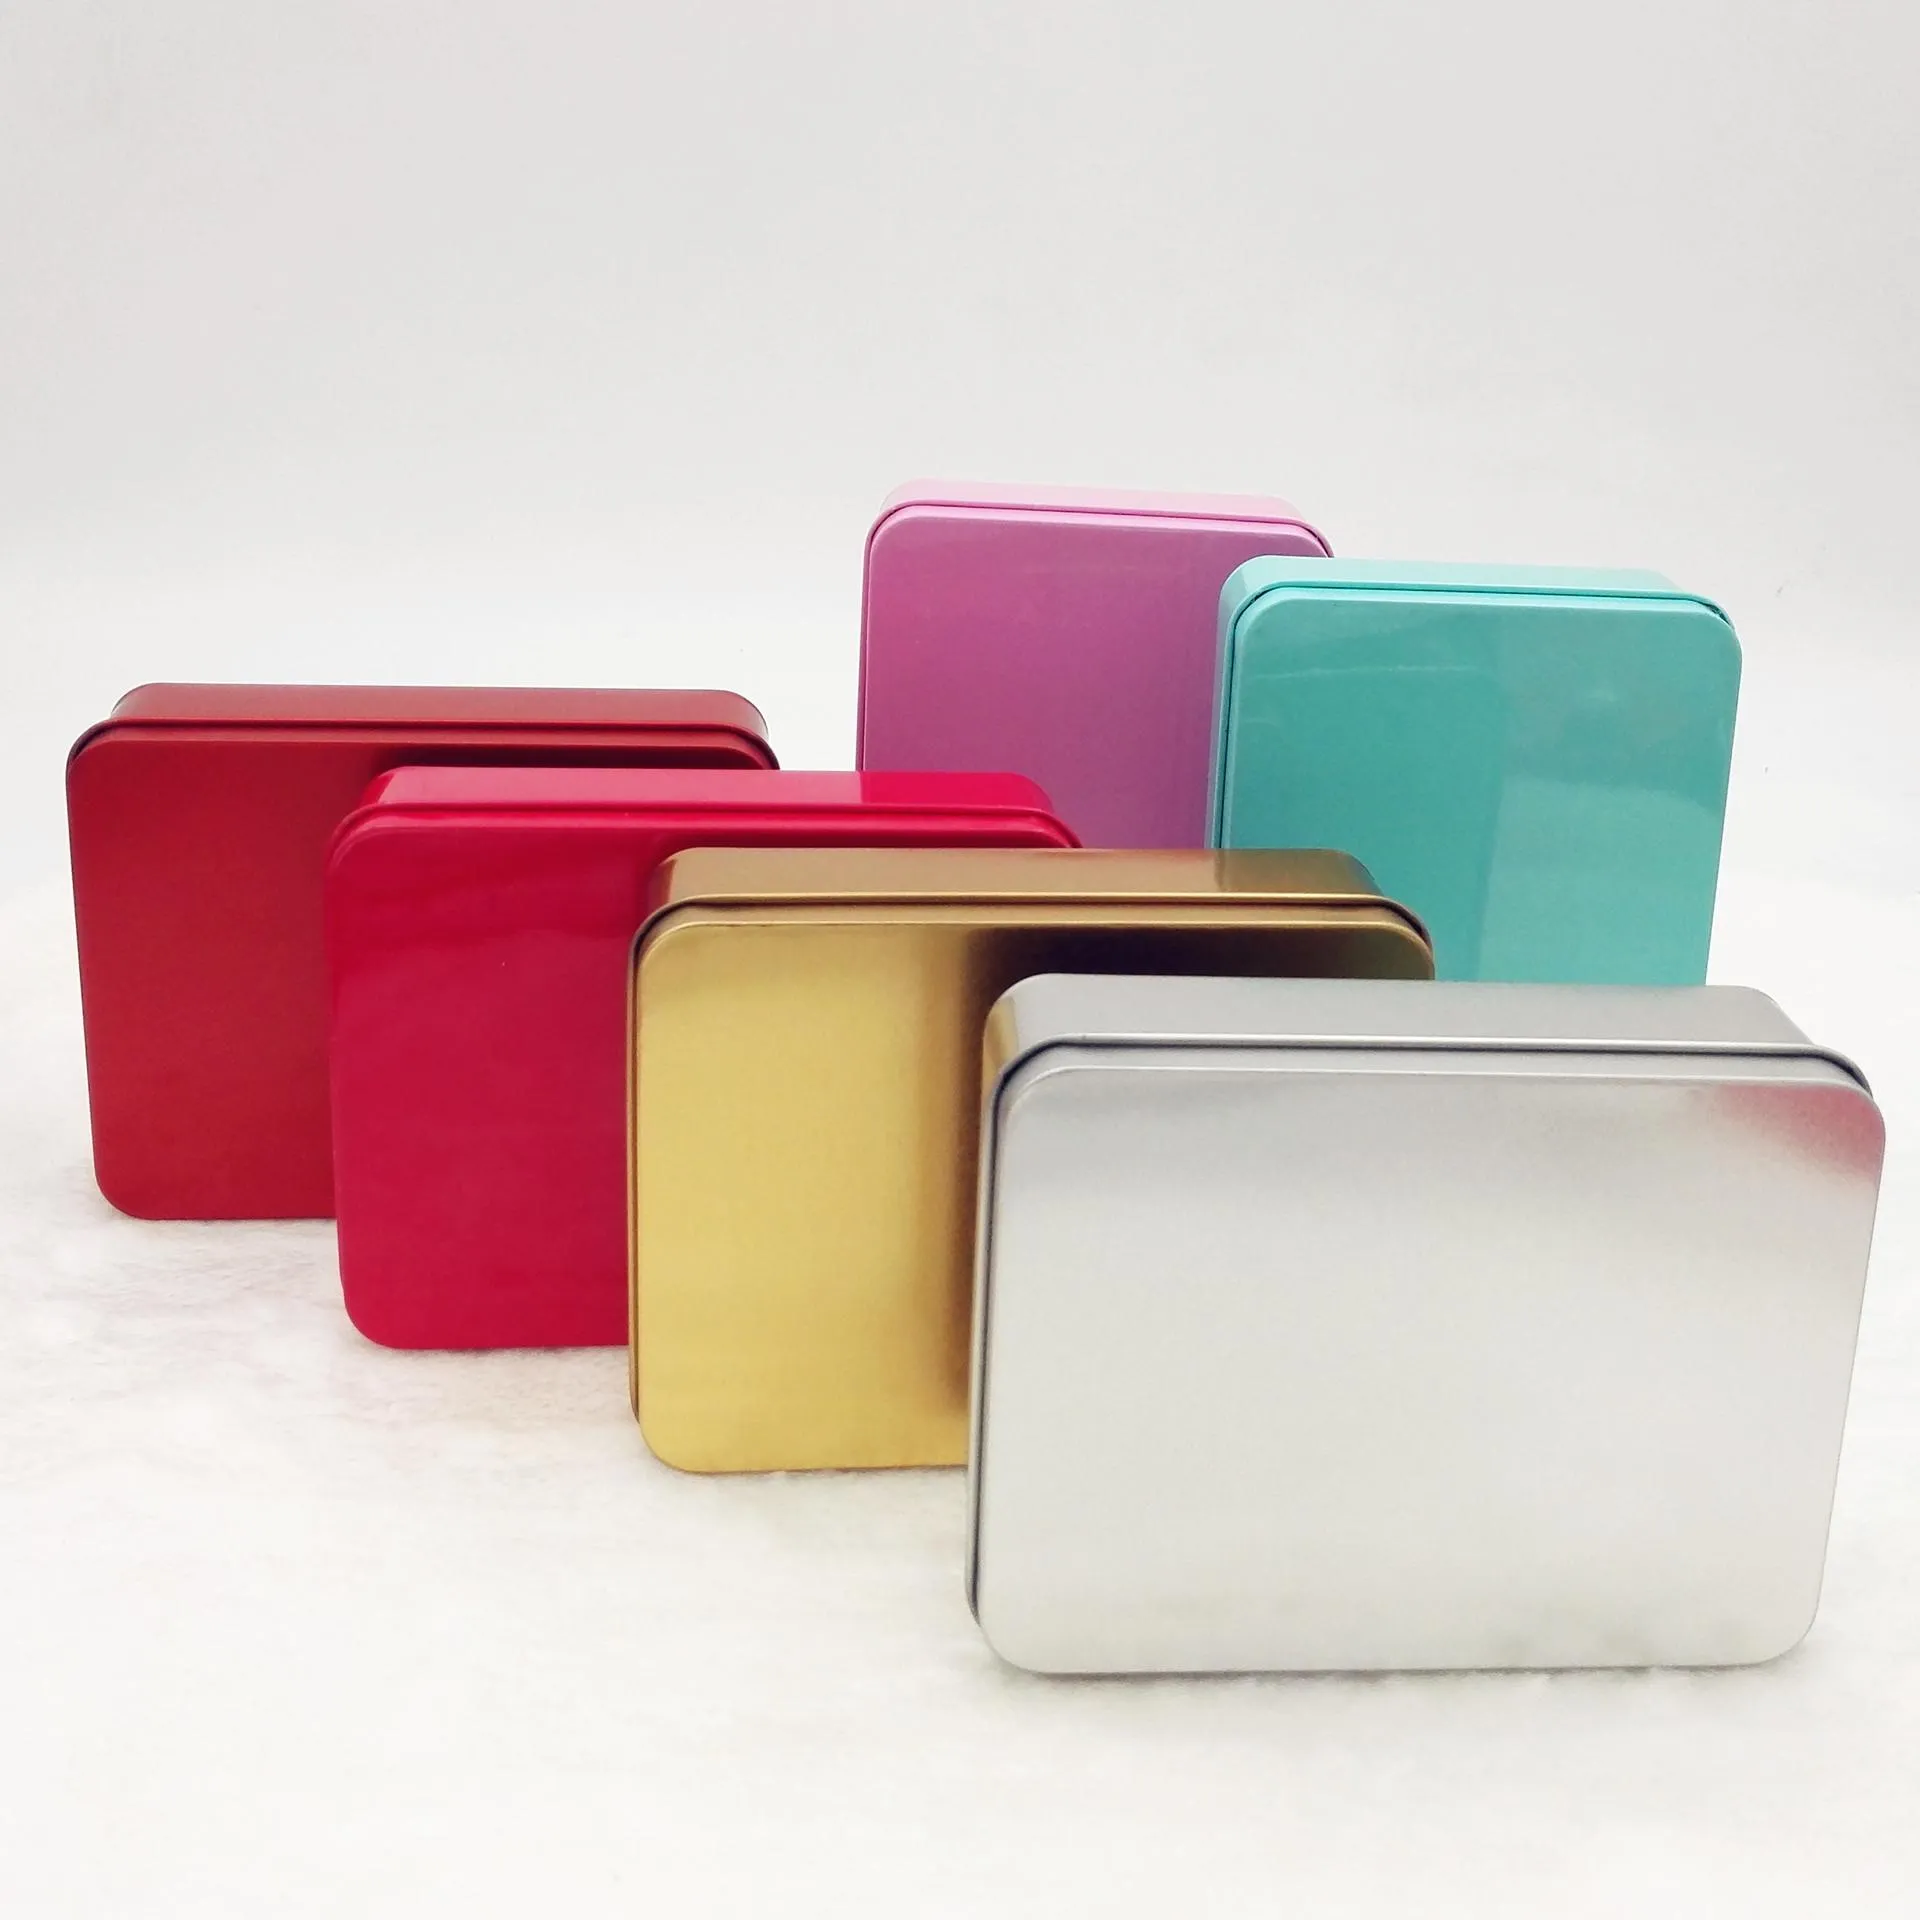 12cm *9cm *4cm Tin Case Storage Box Metal Rectangle Container for beads business card candy herbs DH9811